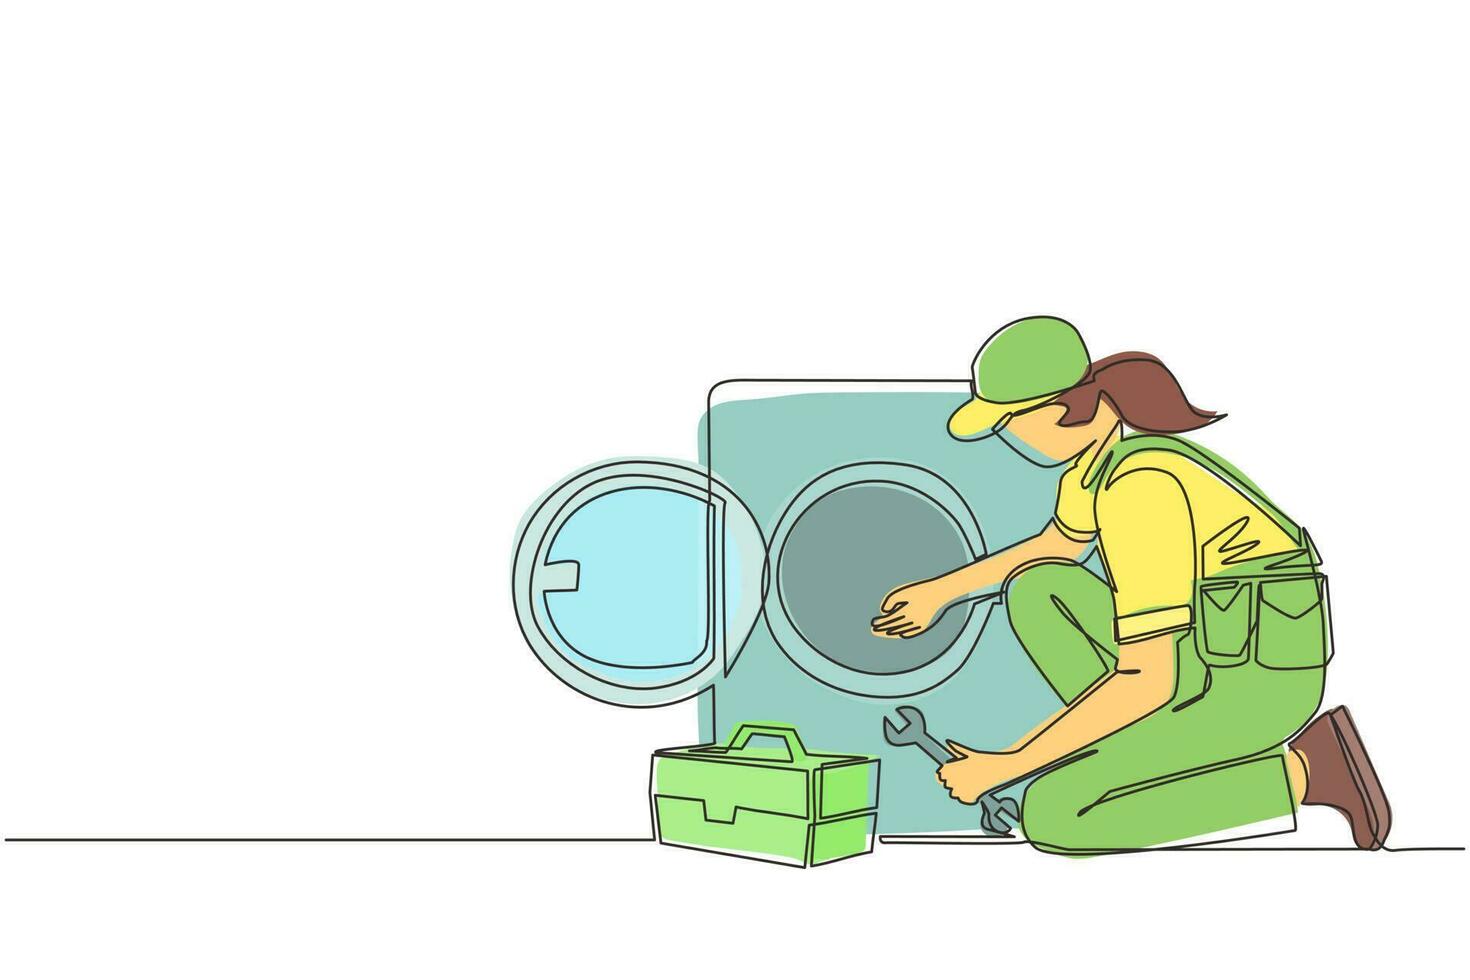 Single continuous line drawing professional repairwoman fixing washing machine at home. Plumbing specialist with toolbox fixing, repairing washer, washing machine. One line draw graphic design vector